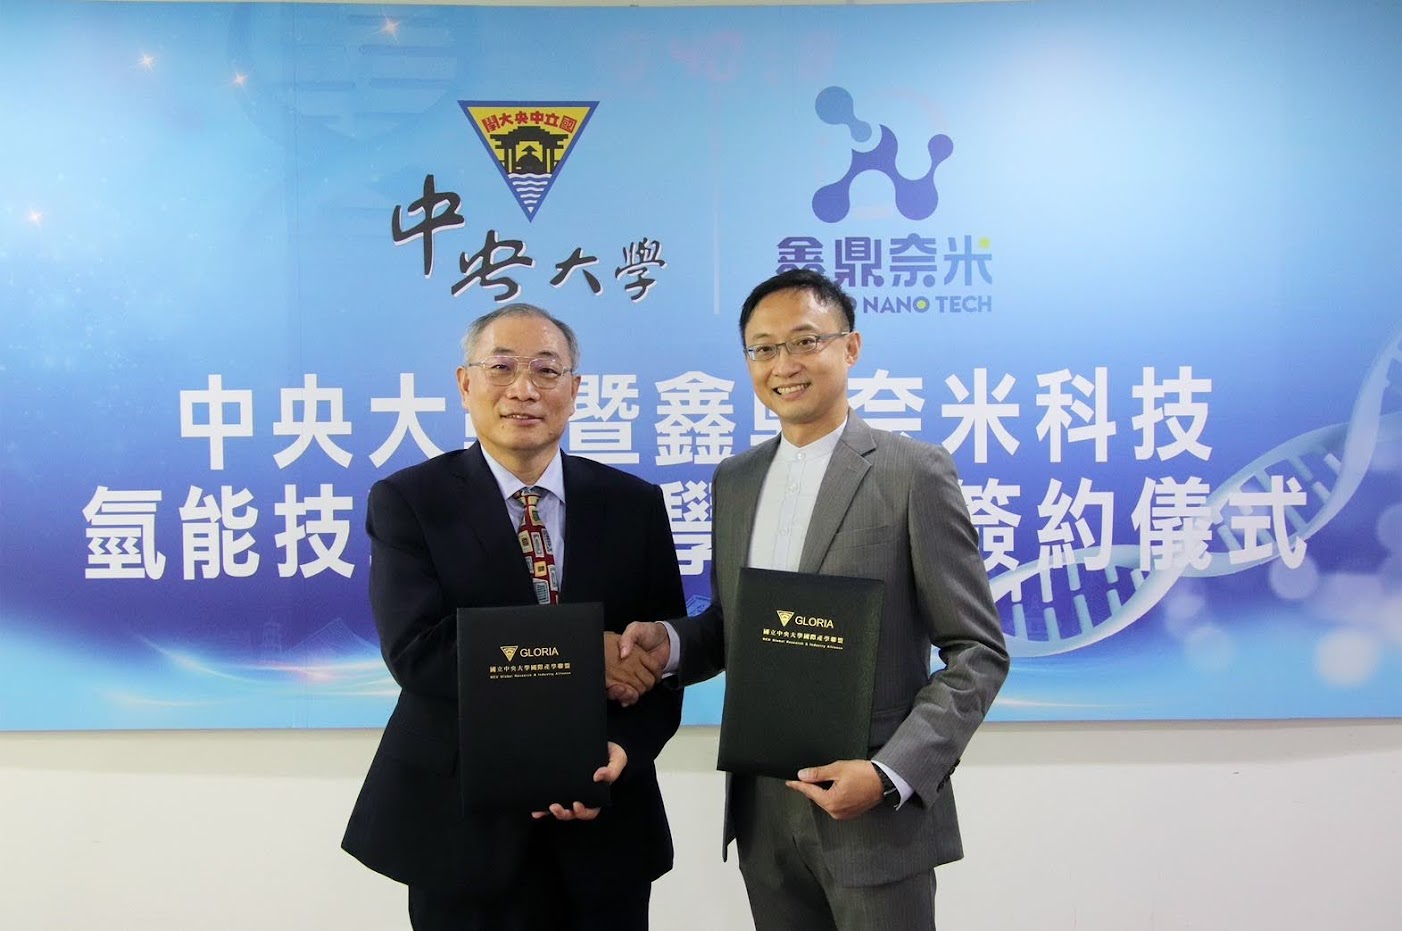 The partnership between NCU and Tripod Nano Technology, is dedicated to the development of key technology for "Seawater Hydrogen Production." Photo by Chen Ju-Chih